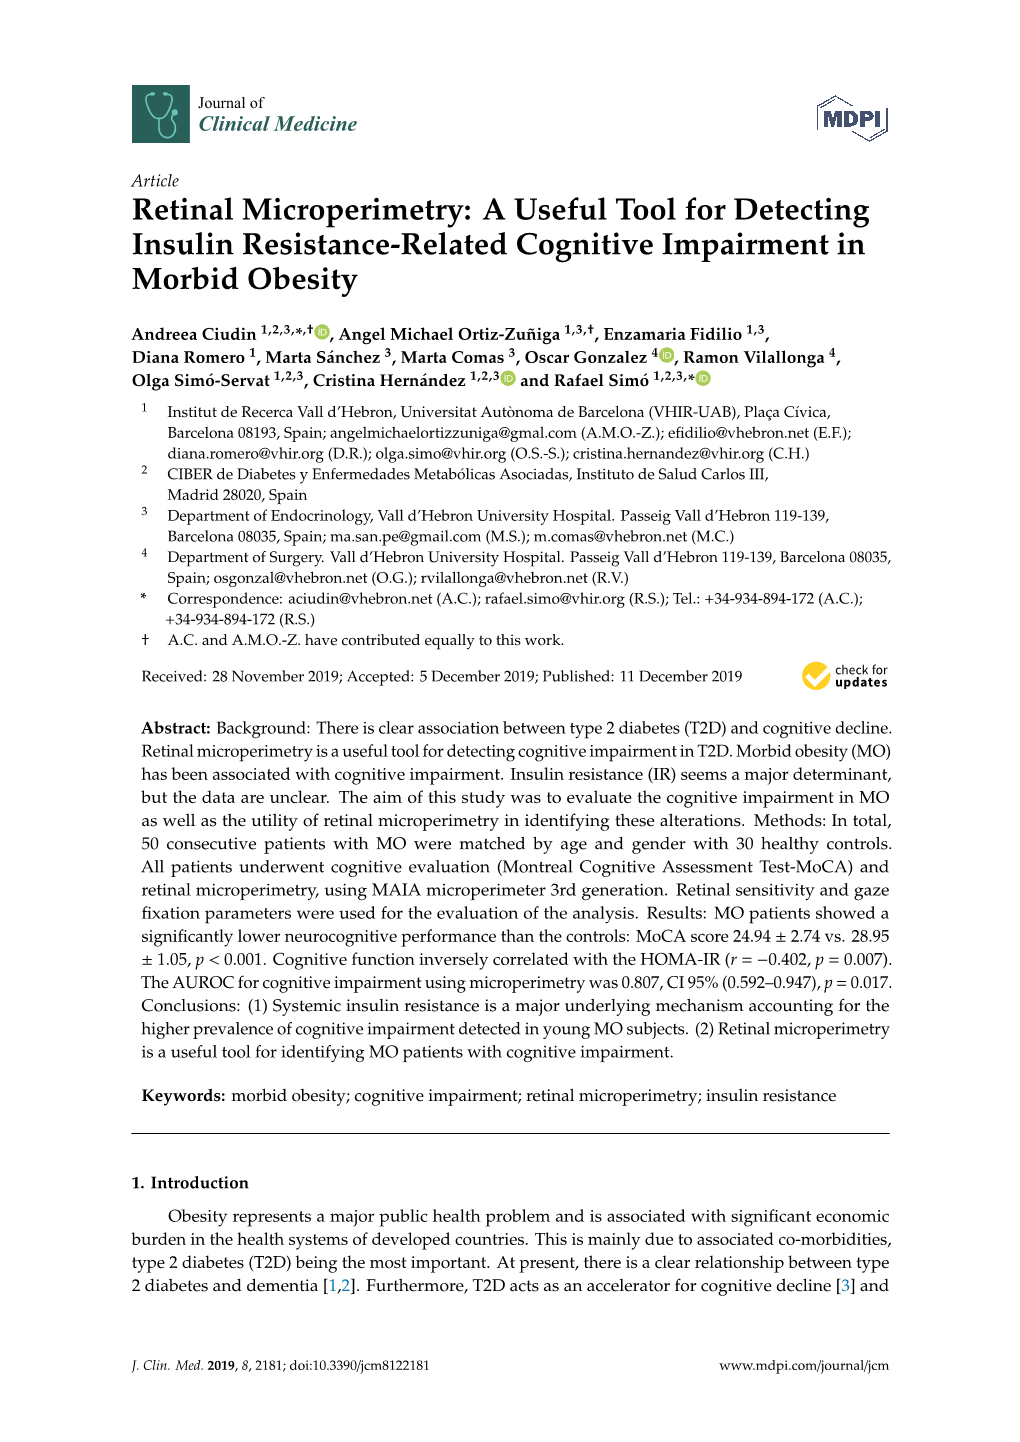 Retinal Microperimetry: a Useful Tool for Detecting Insulin Resistance-Related Cognitive Impairment in Morbid Obesity